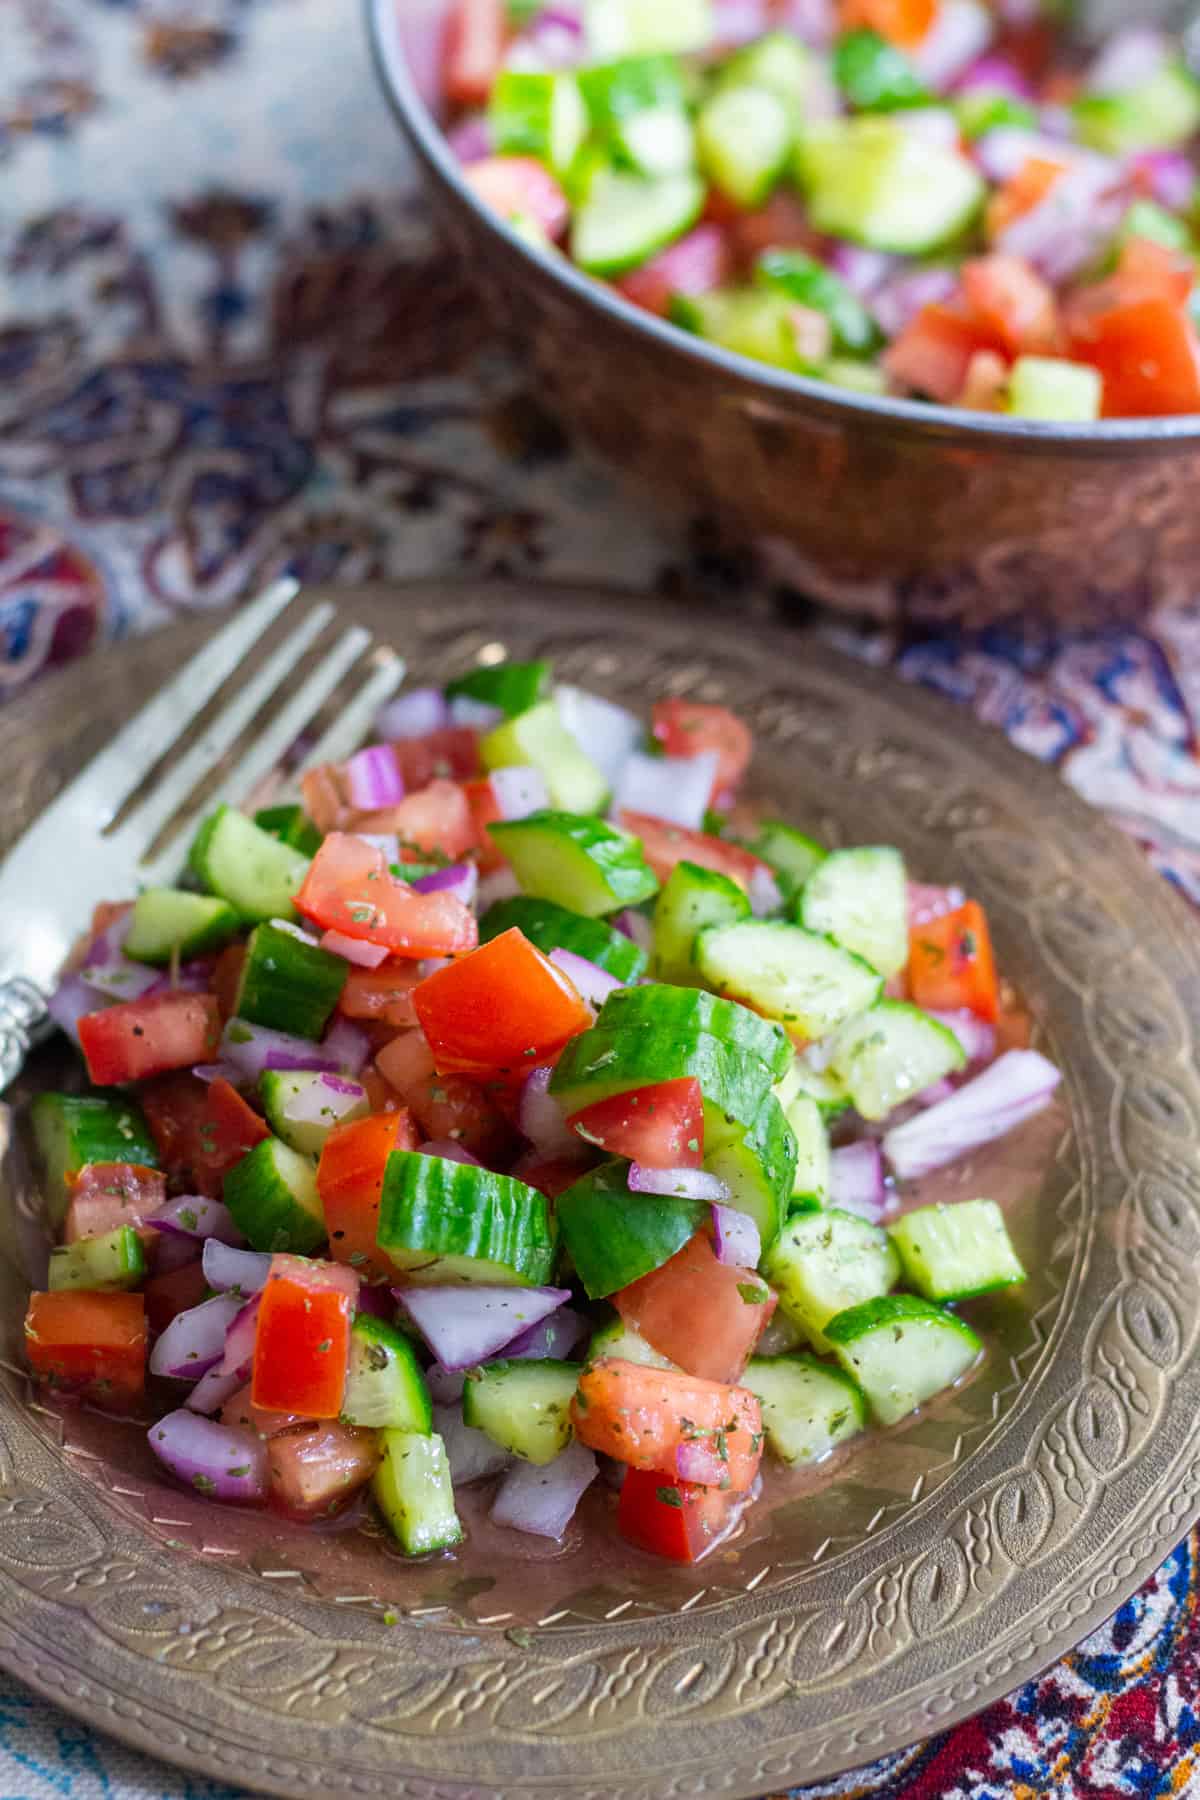 Salad shirazi is a classic Persian salad made with 3 ingredients. 